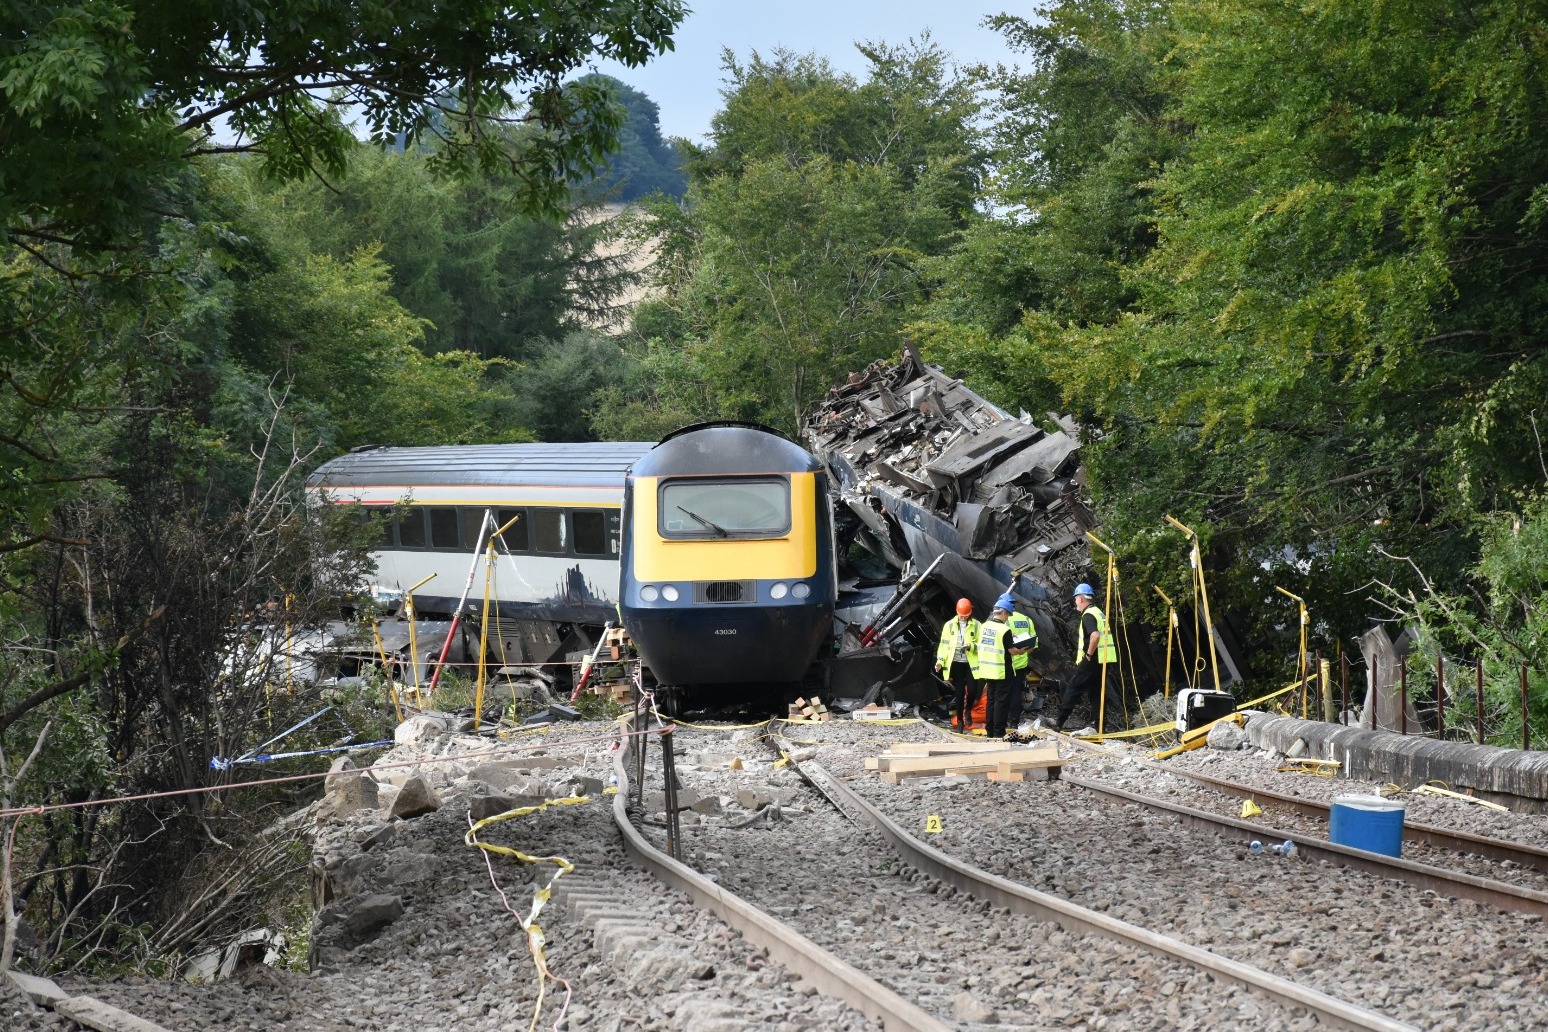 Union calls for high speed trains to be withdrawn in wake of Stonehaven crash